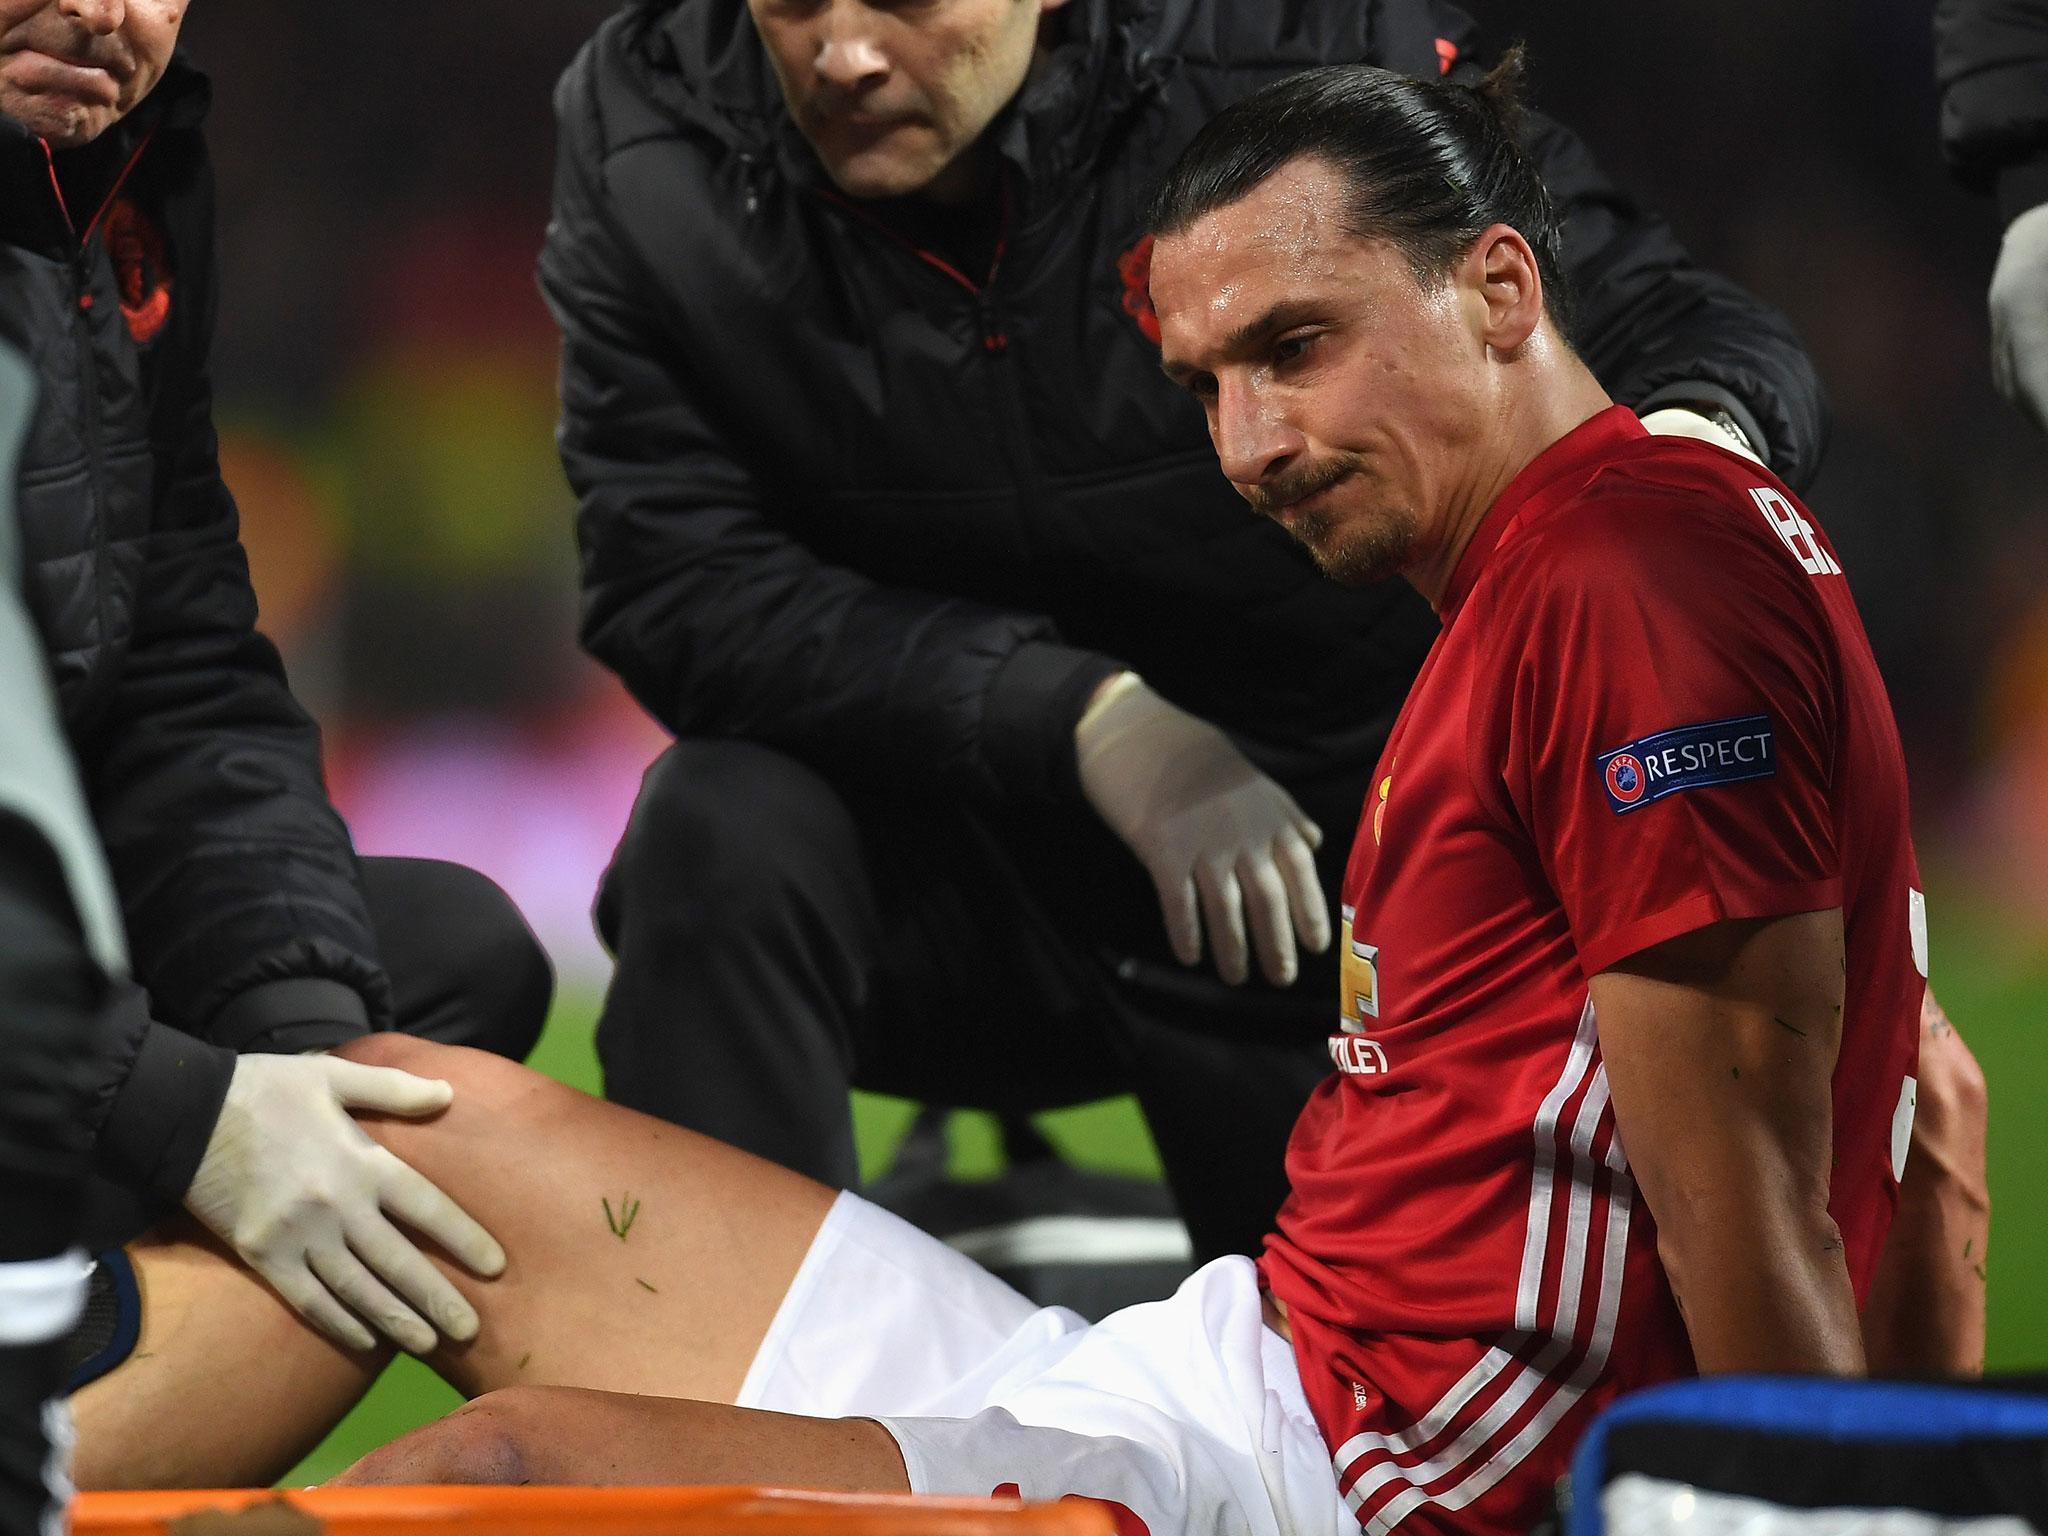 Zlatan Ibrahimovic was forced off with a knee injury late in the game